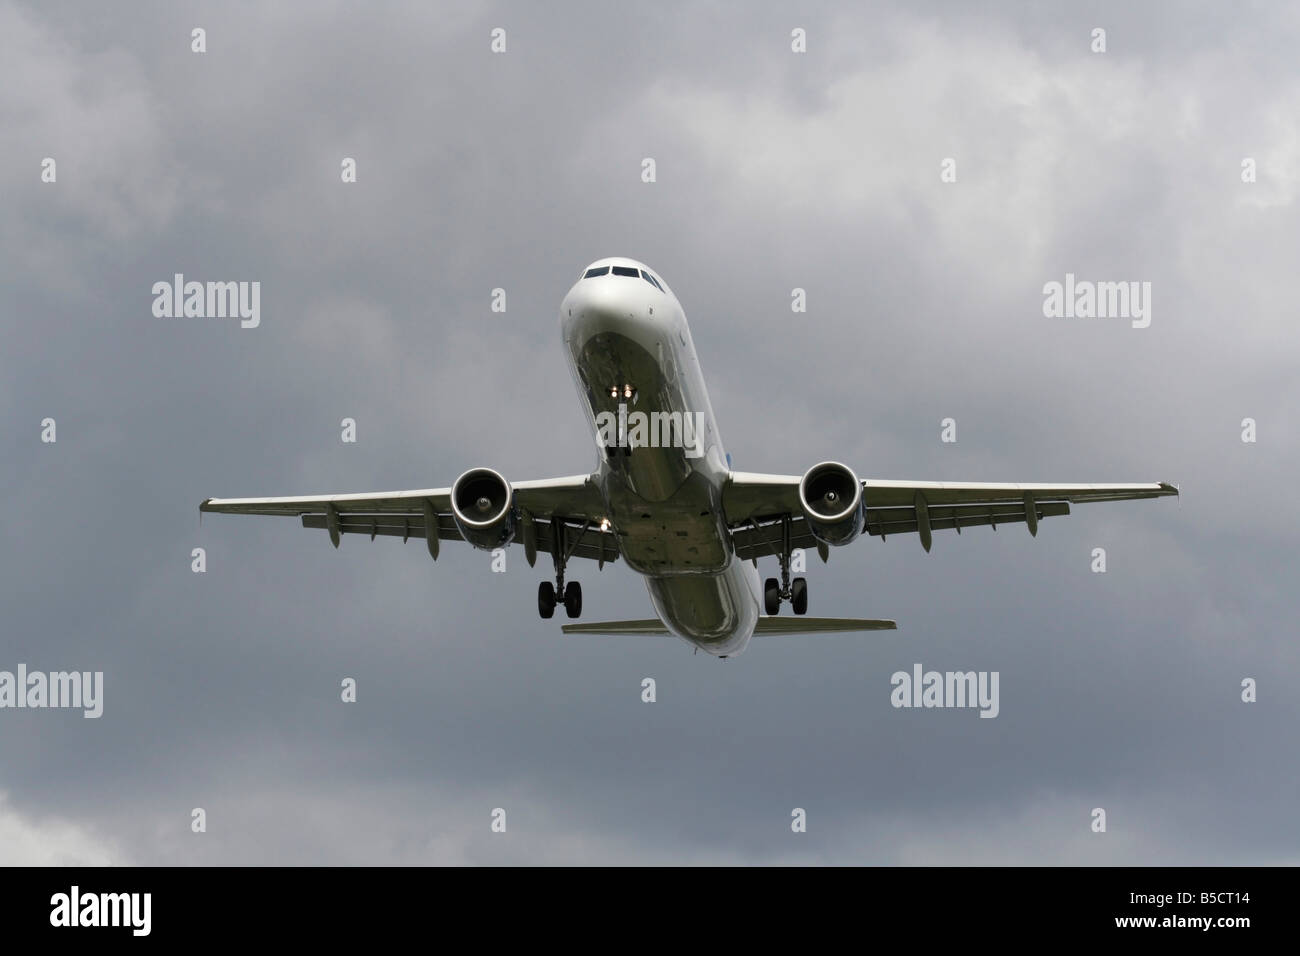 Air travel. Airbus A321 commercial airliner arriving in a cloudy sky. Front view with no livery and proprietary details deleted. Modern aviation. Stock Photo